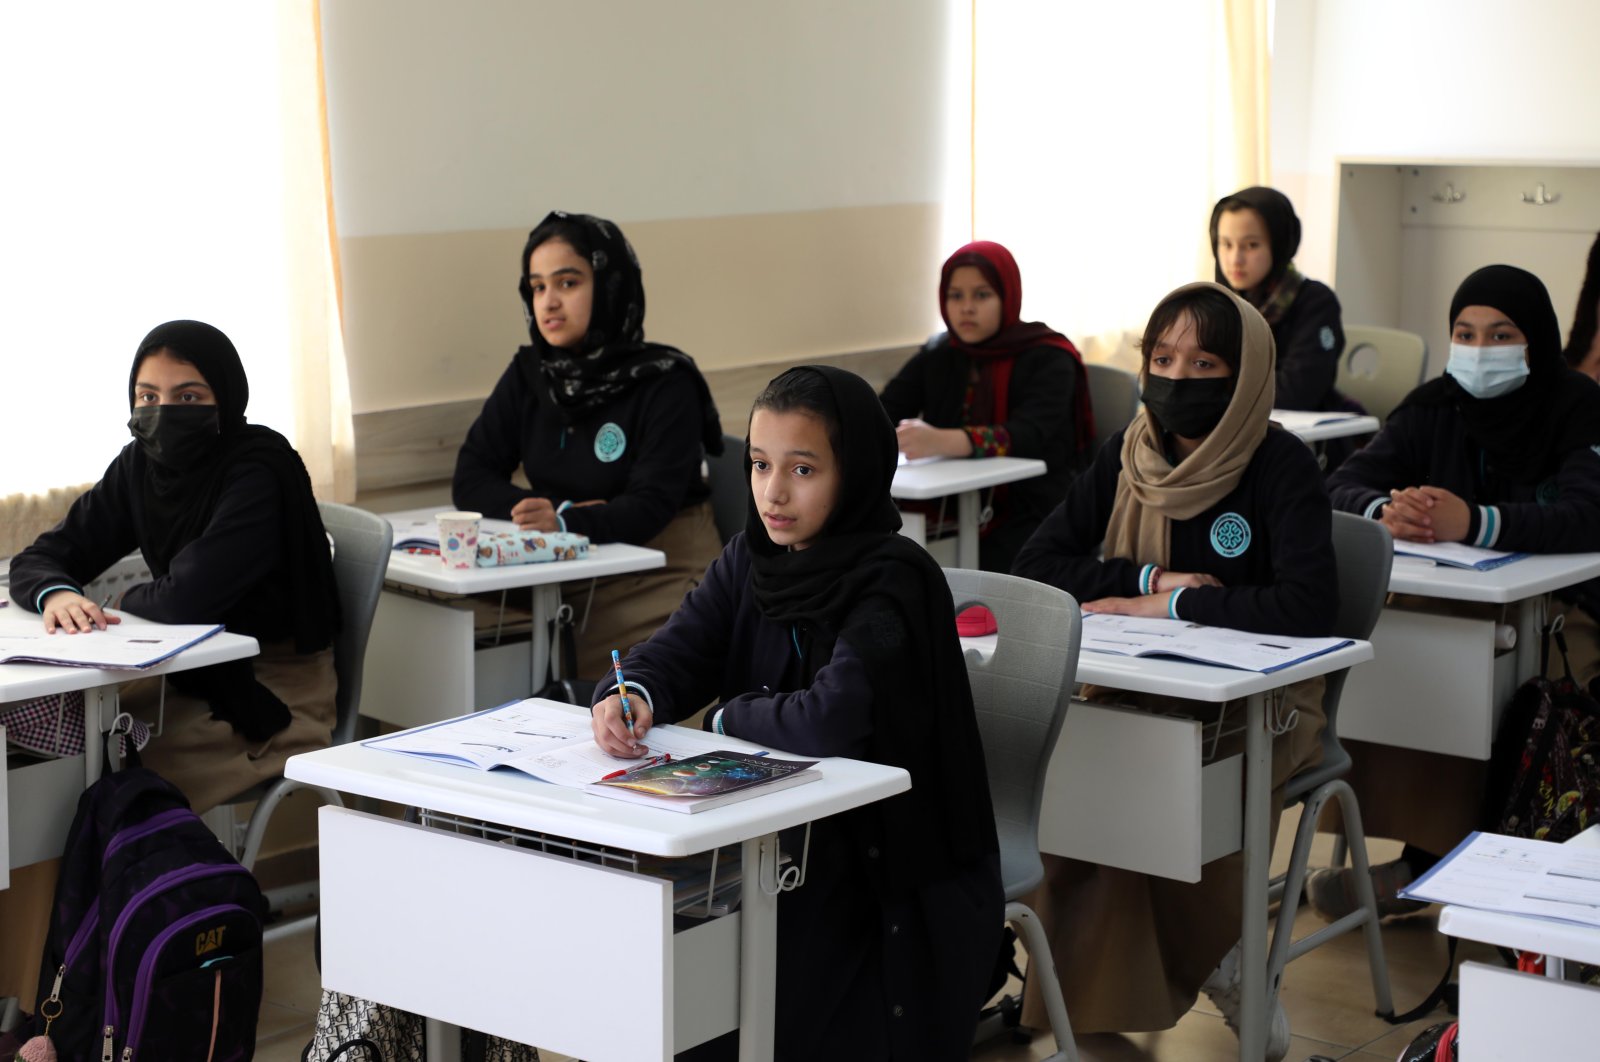 Female students attend a class at a Maarif school in Herat, Afghanistan, March 17, 2022. (AA PHOTO)